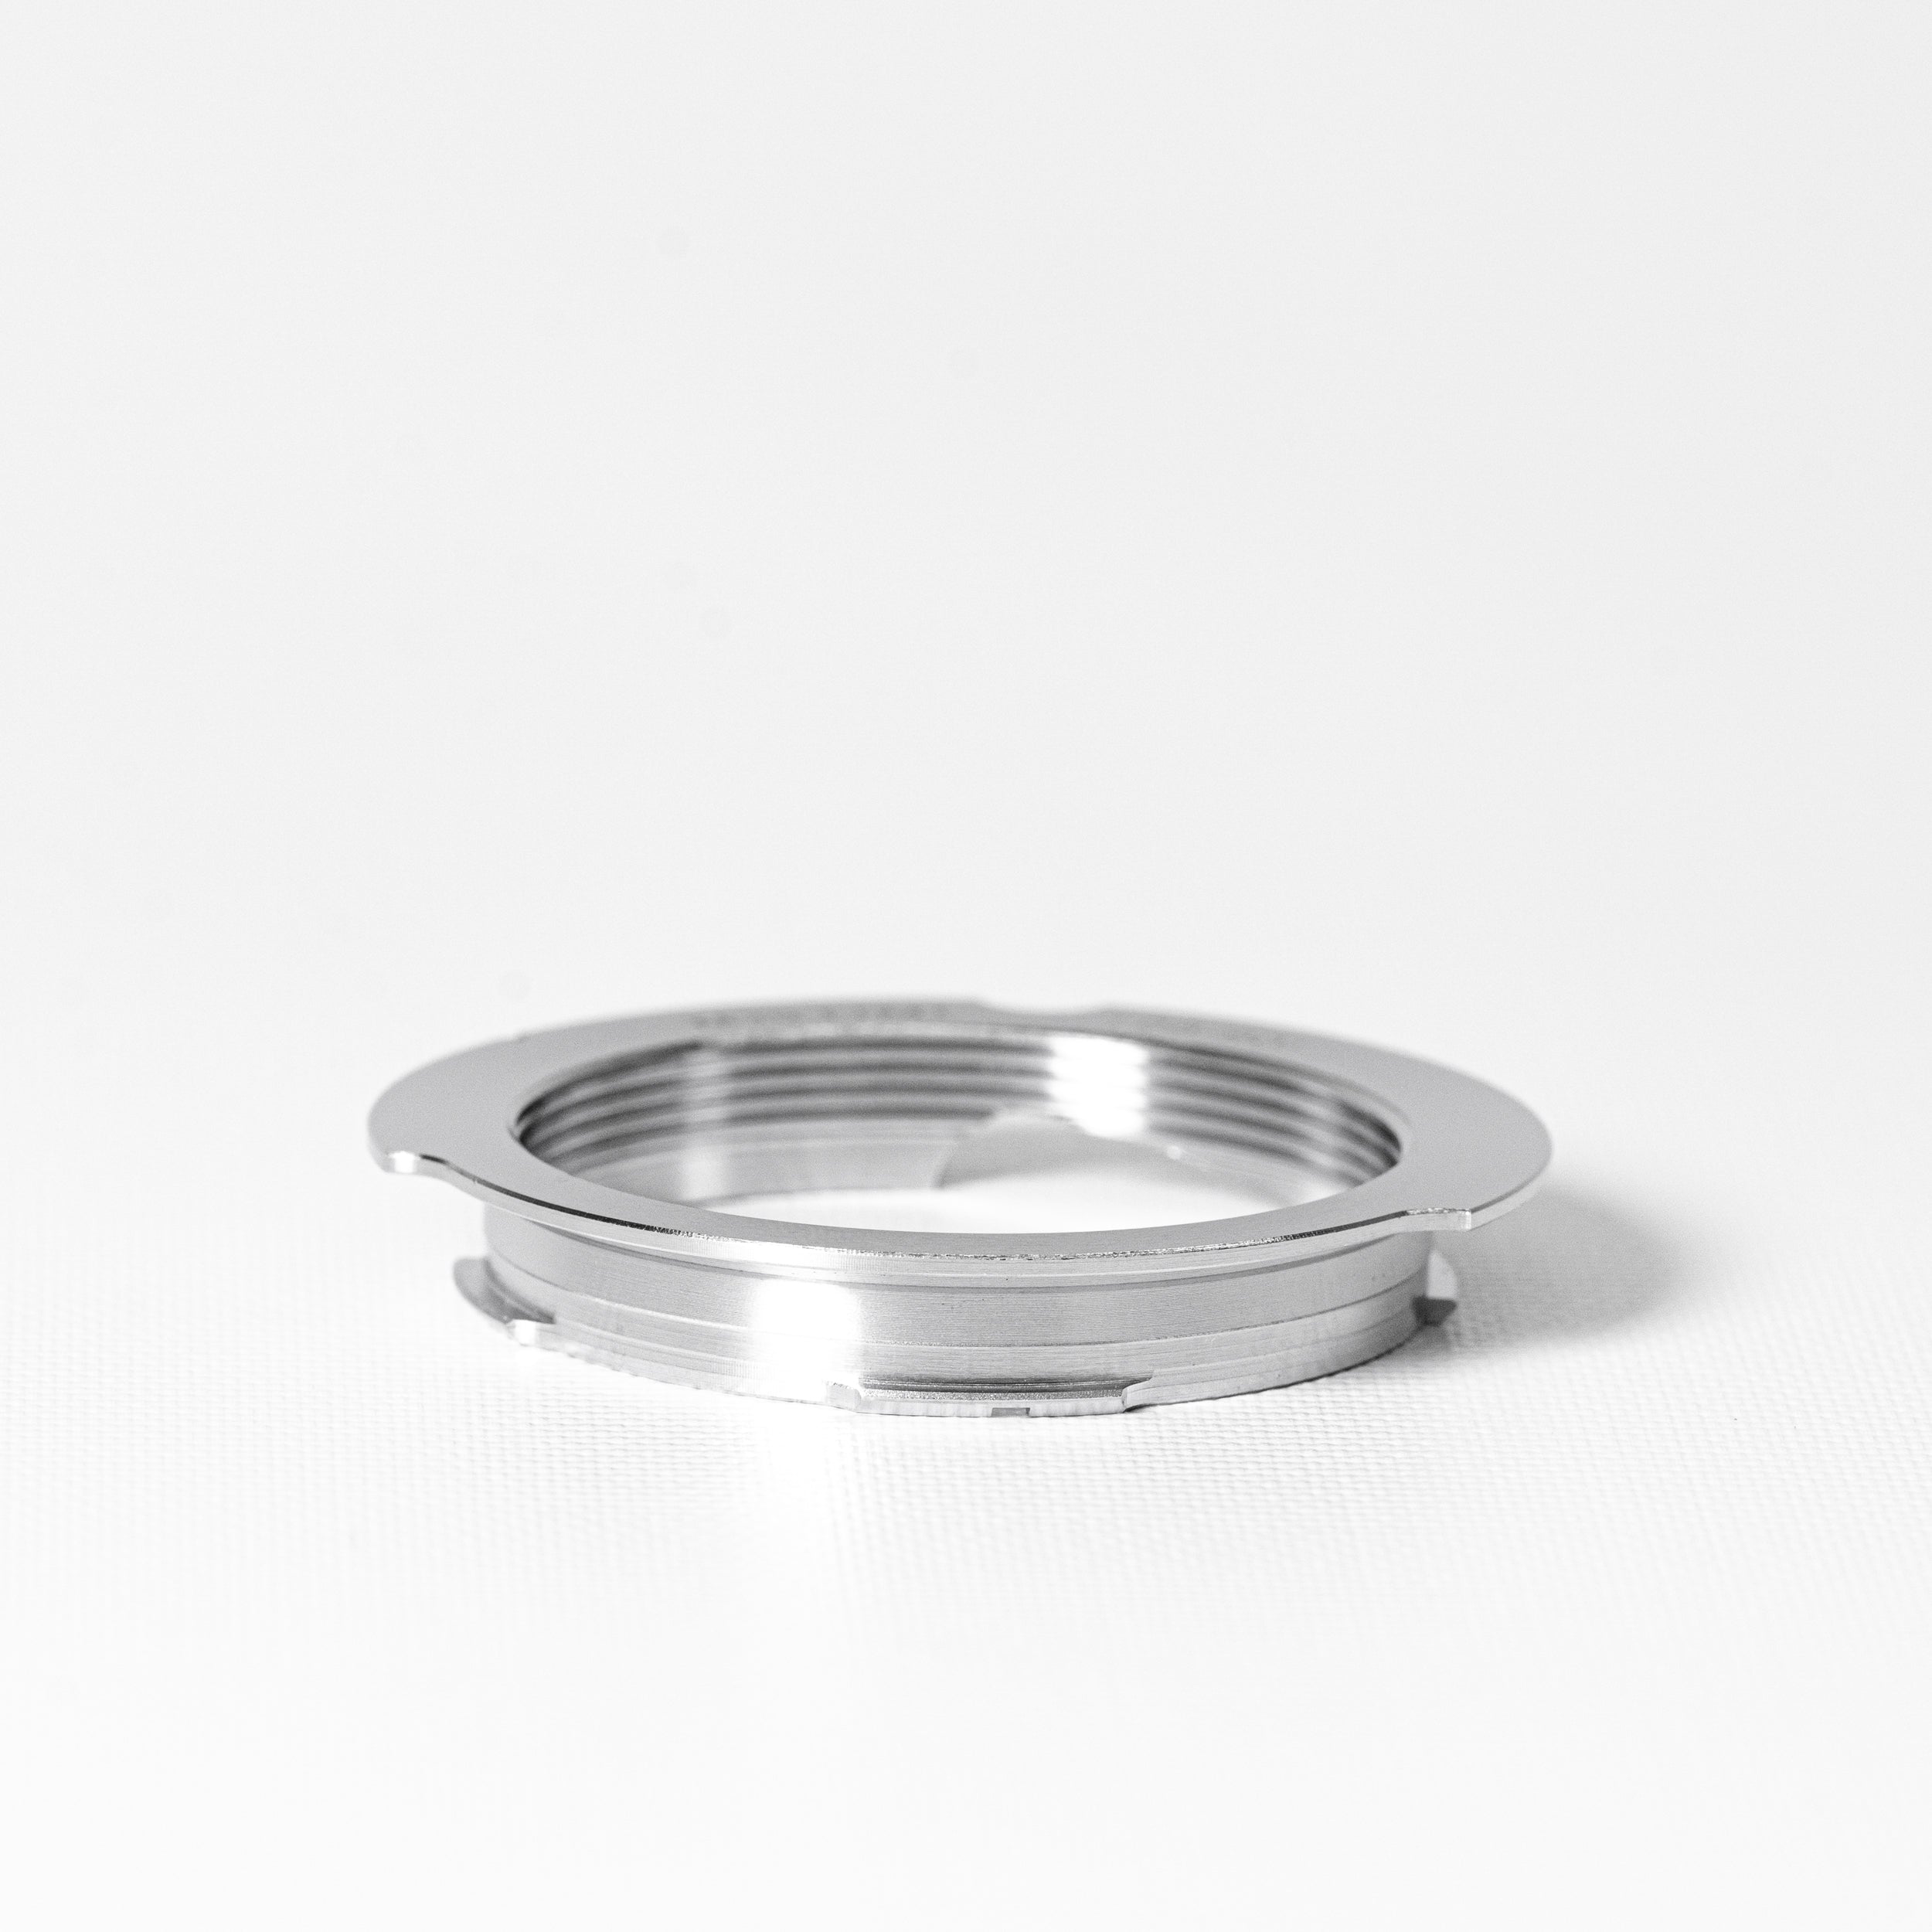 ARTRA LAB Leica L39 Screw Mount to Leica M Mount Adapter (Suitable for 35mm, 135mm Lenses ) [Full Copper]